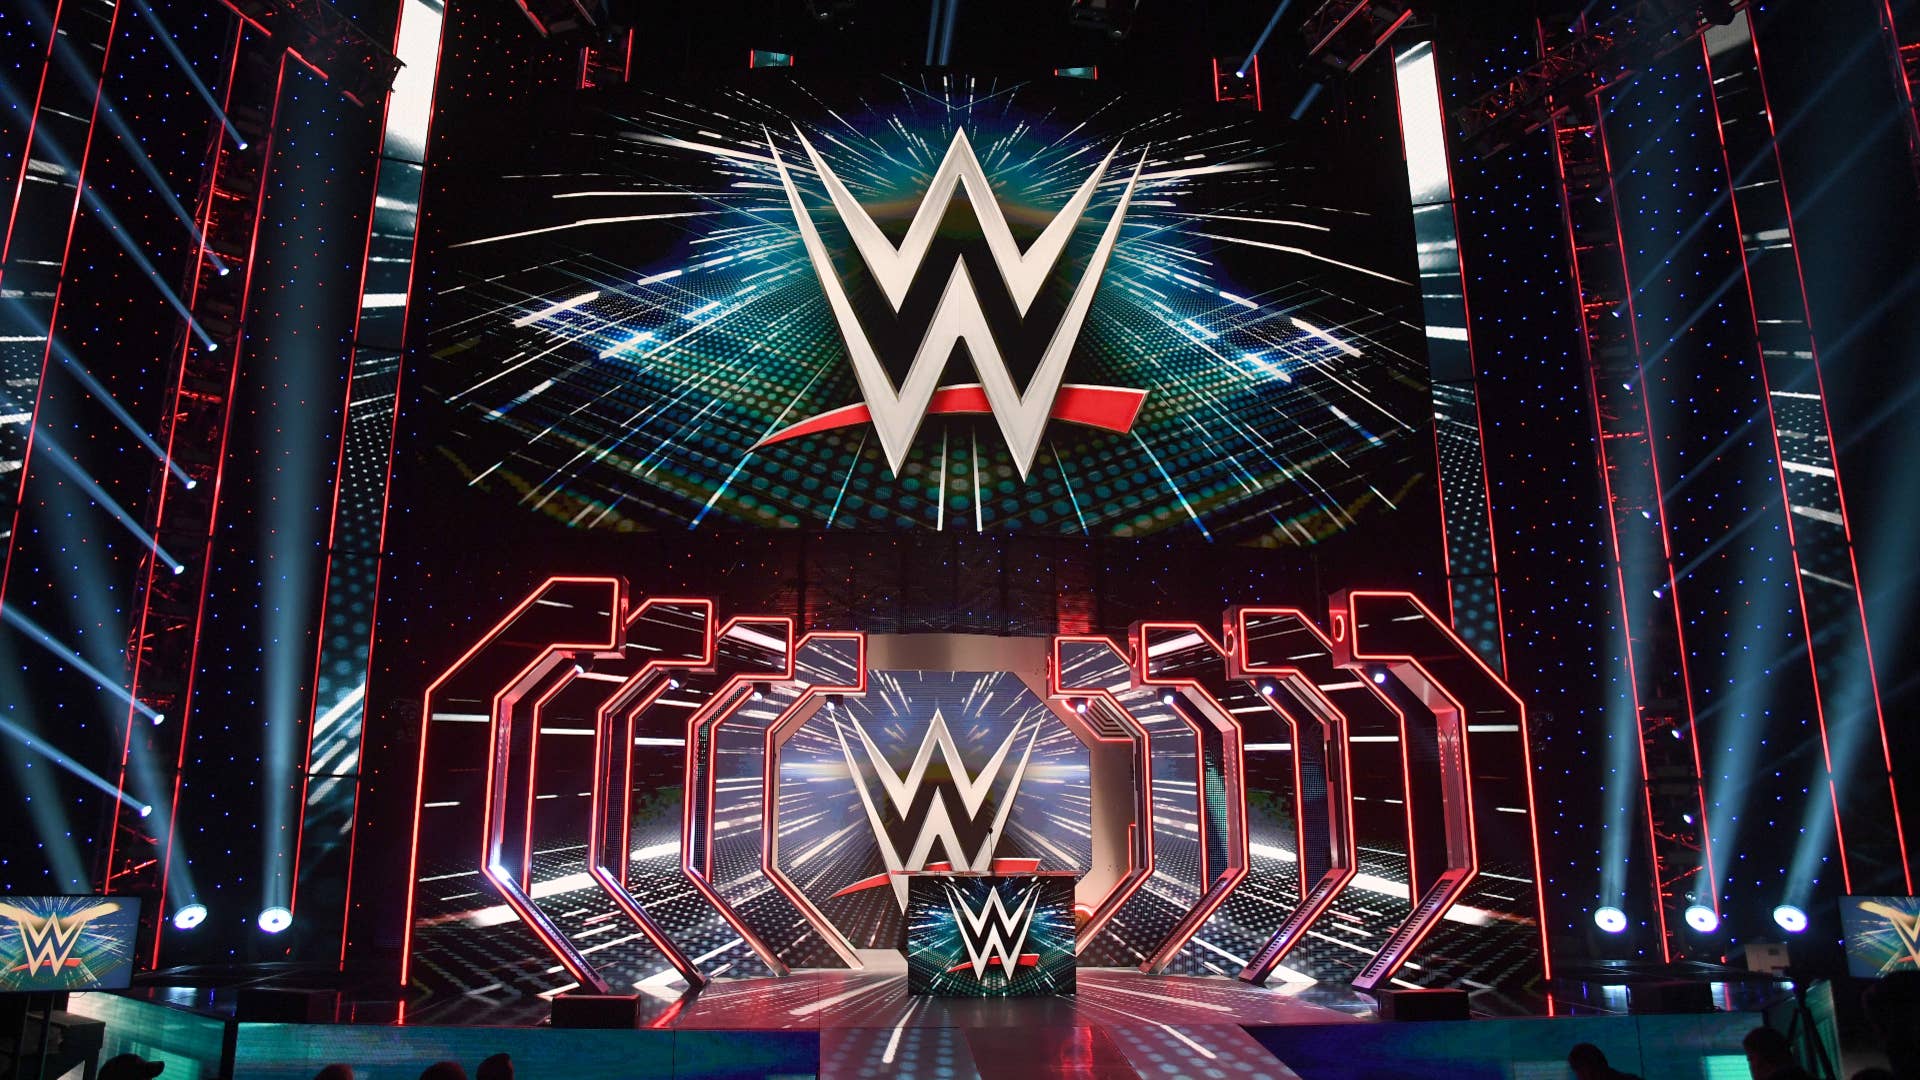 WWE logos are shown on screens before a WWE news conference.